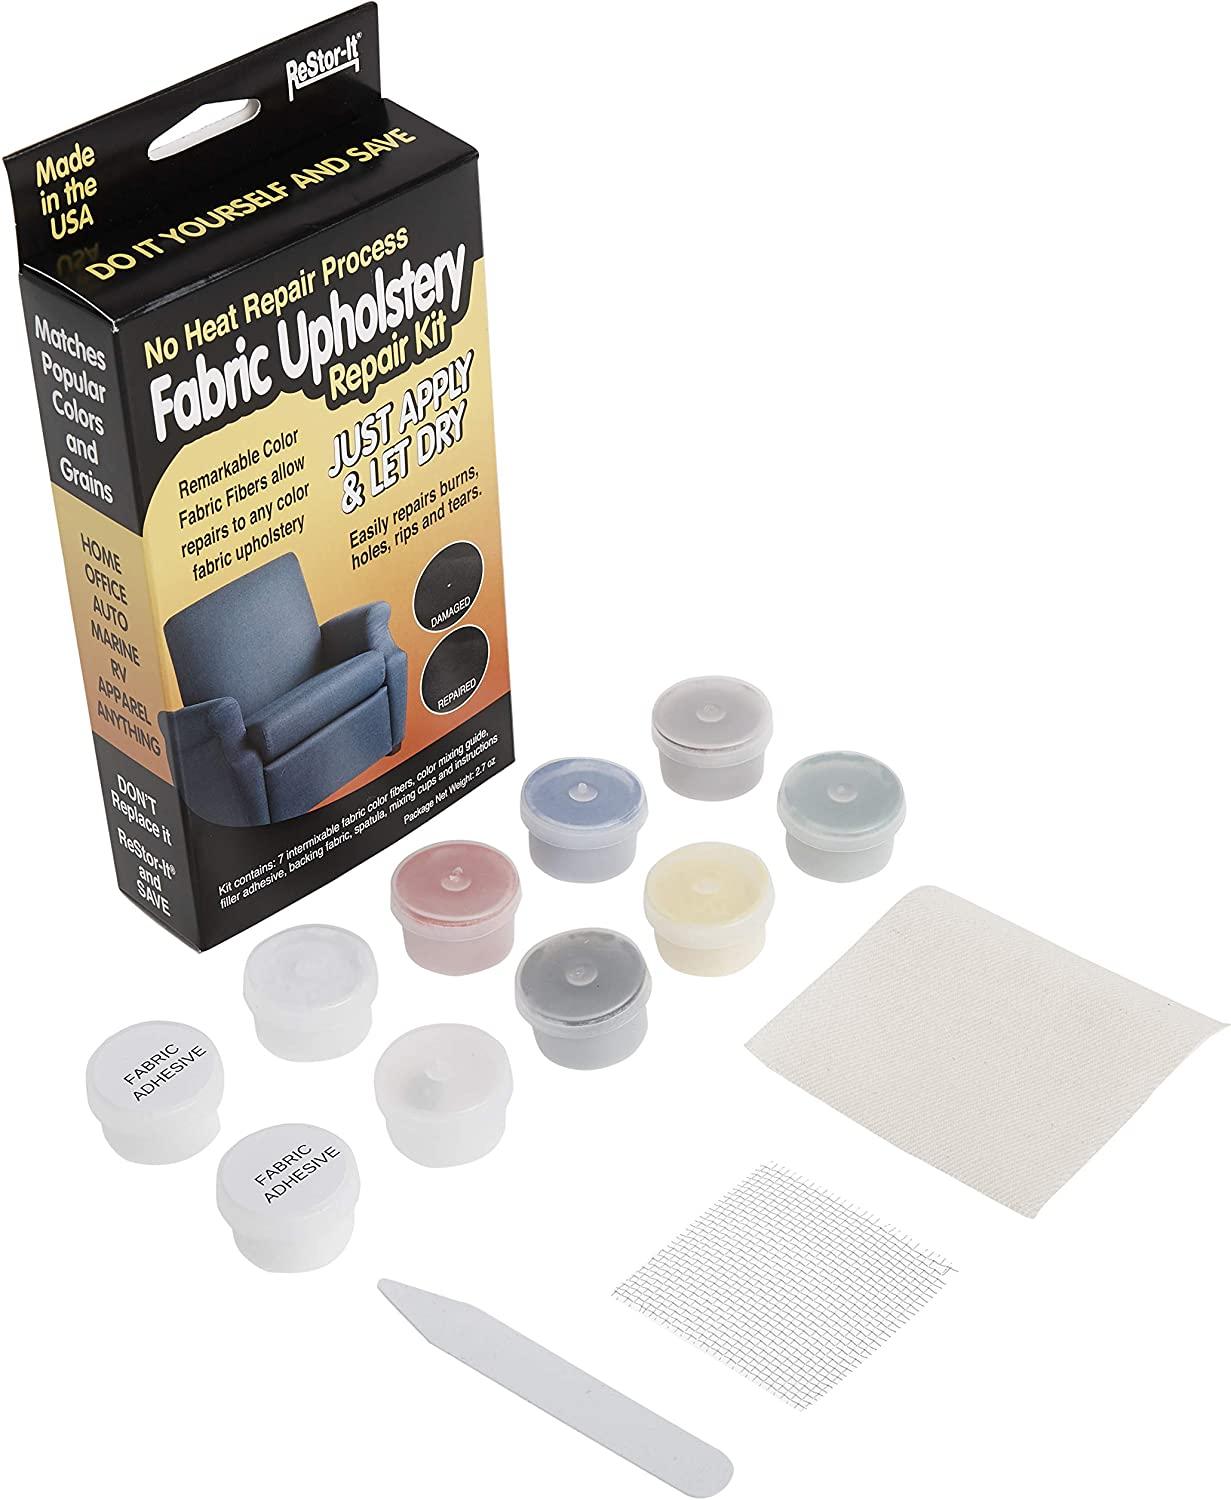 Master Manufacturing Fabric Upholstery Repair Kit, Assorted